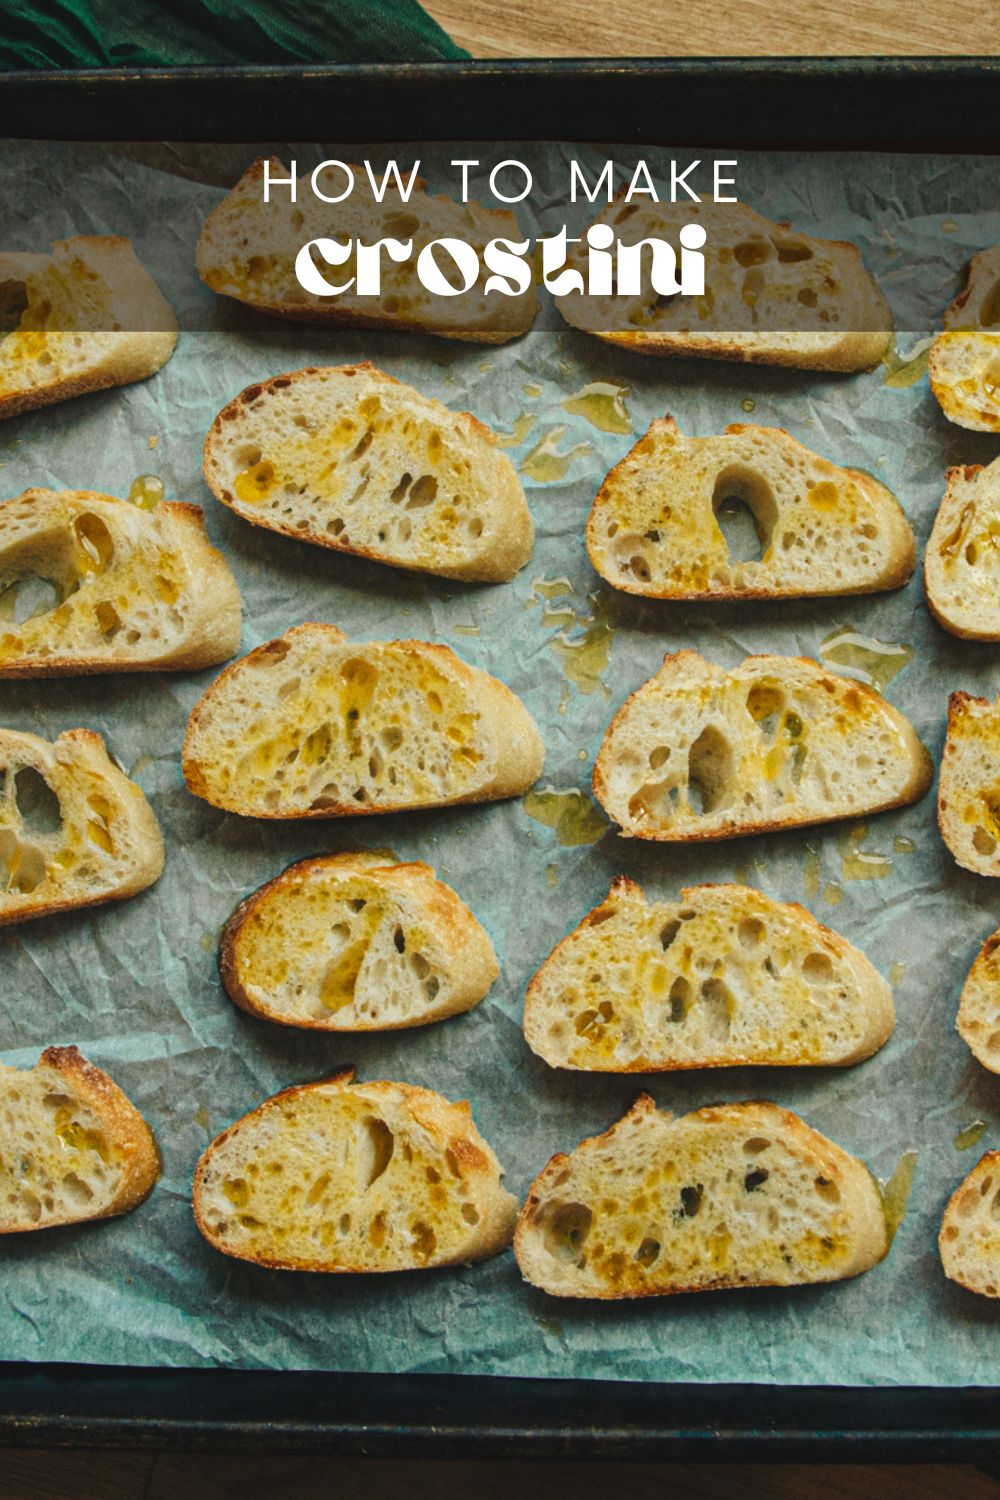 Once you learn how to make crostini, there's no need to resort to the store-bought variety again! Crostini bread is the perfect amount of crispy and goes well with so many delicious toppings. These little bites of heaven are the perfect appetizer or snack, and they're incredibly easy to make!